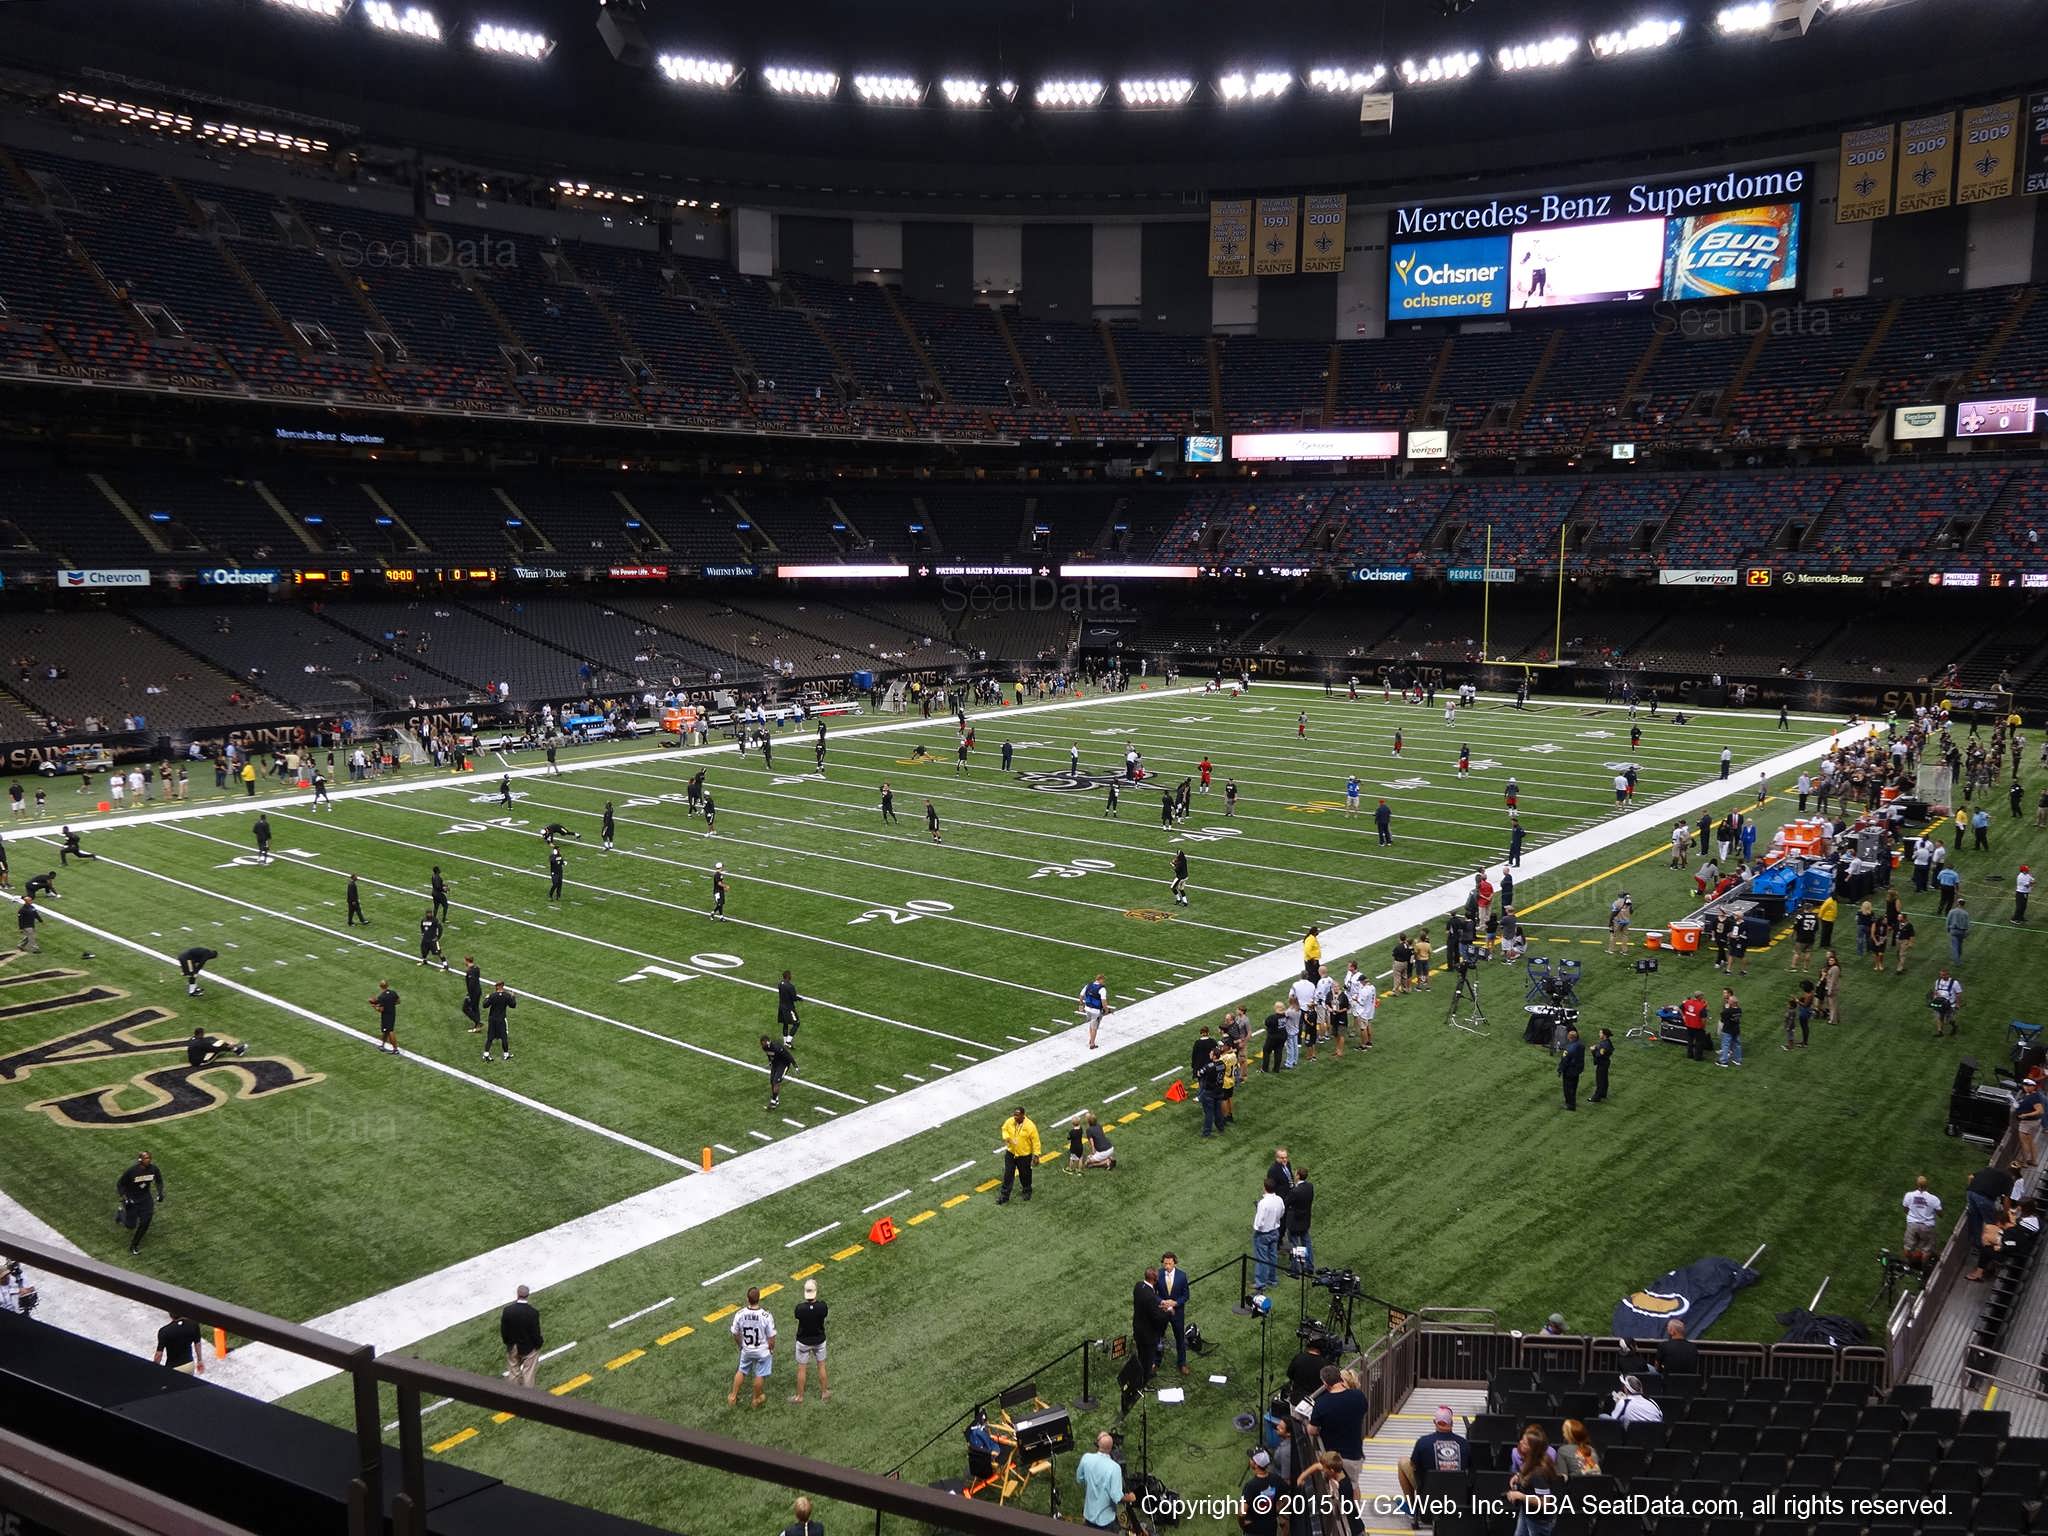 Seat view from section 234 at the Mercedes-Benz Superdome, home of the New Orleans Saints